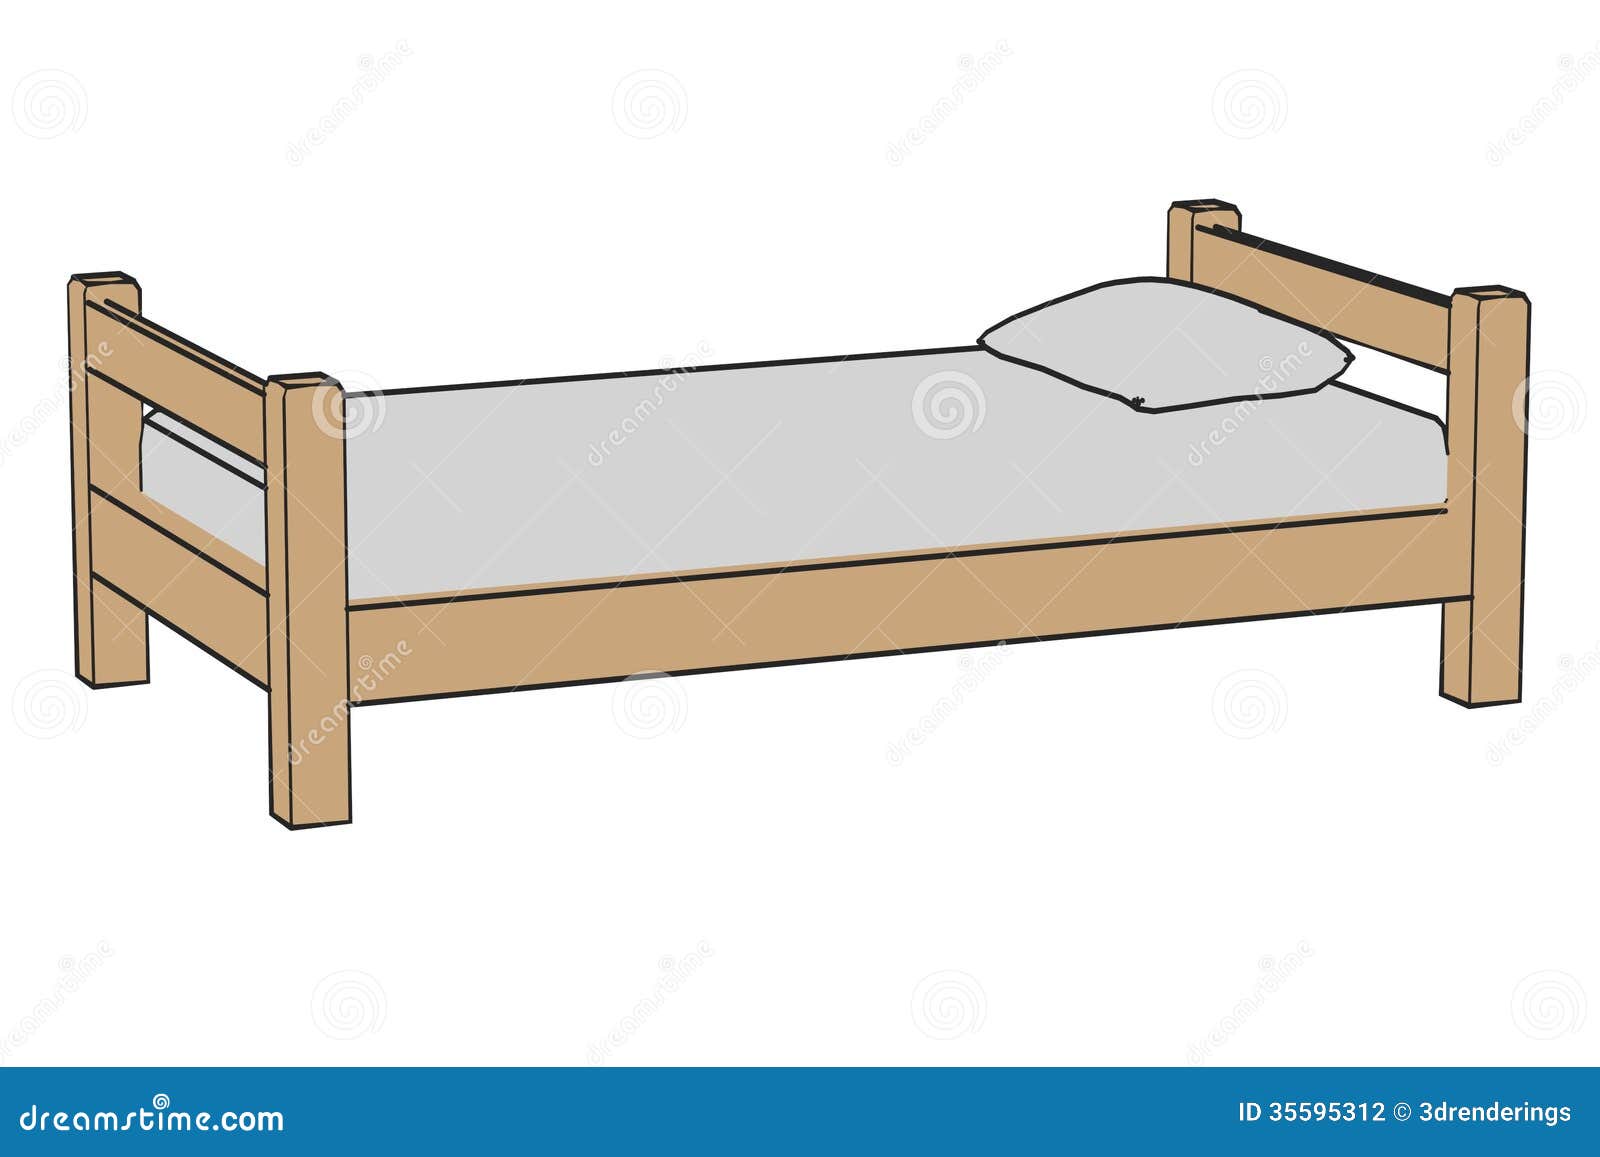 Simple Bed Stock Photography - Image: 35595312